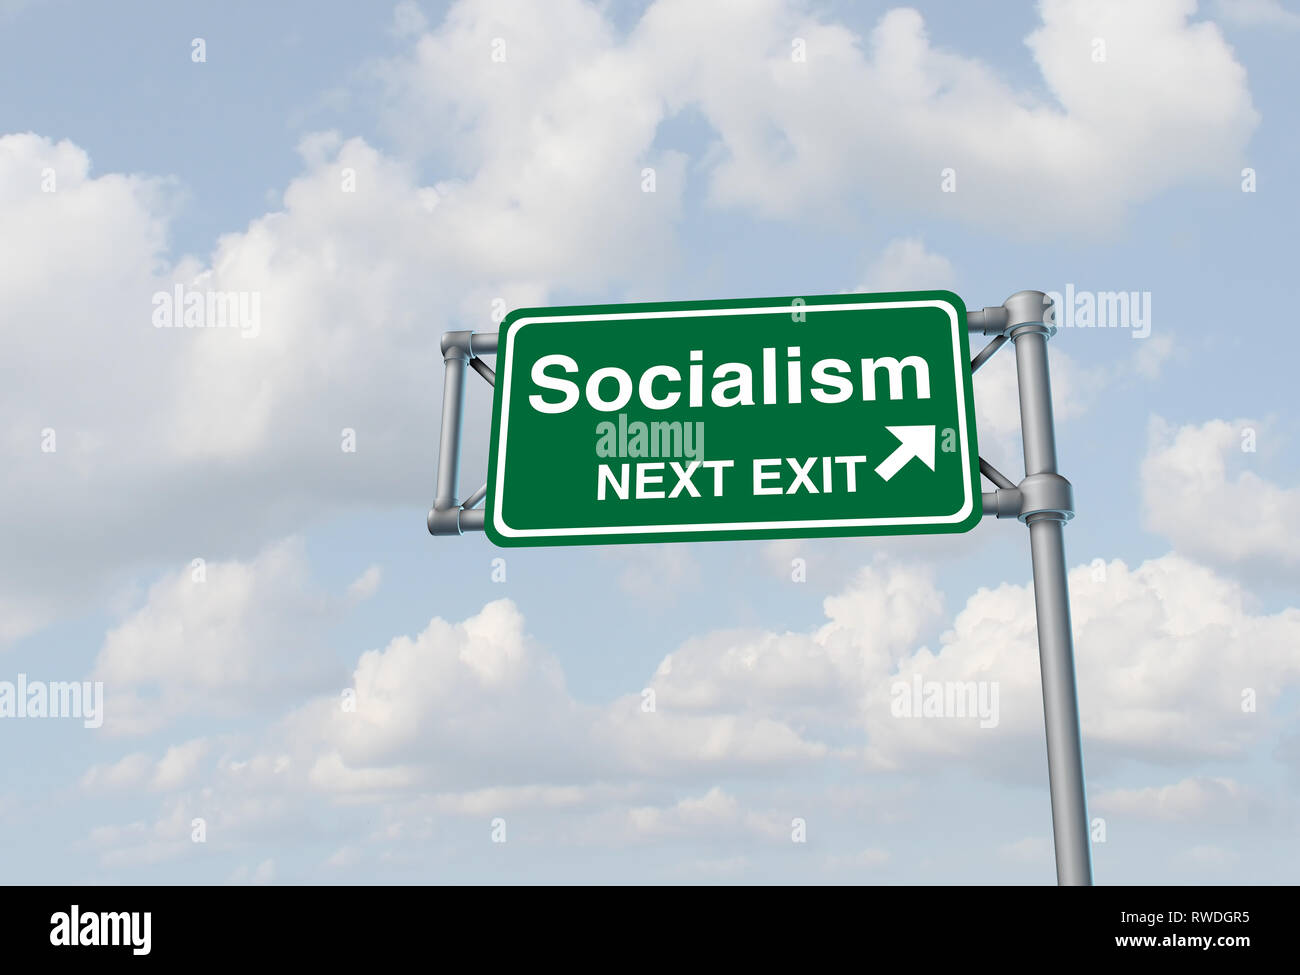 Socialism political ideology and socialist country or social democrat concept as a 3D illustration. Stock Photo